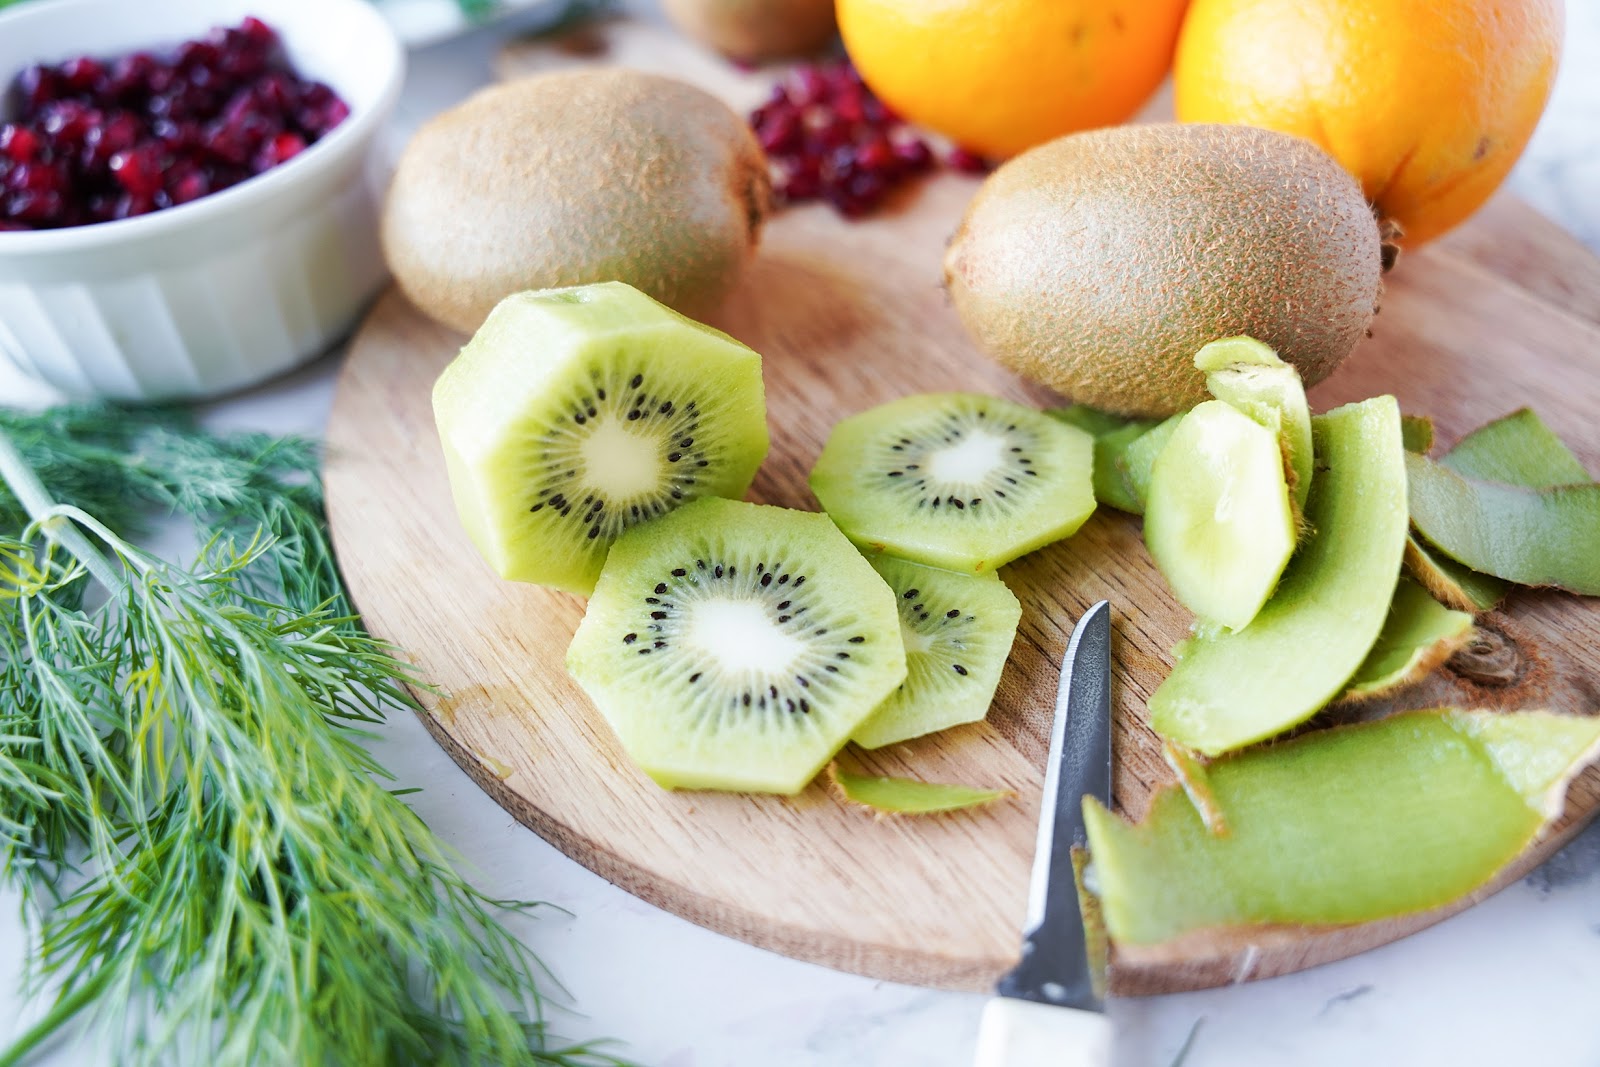 Slice the kiwis and place them in a circle on top of the dill.